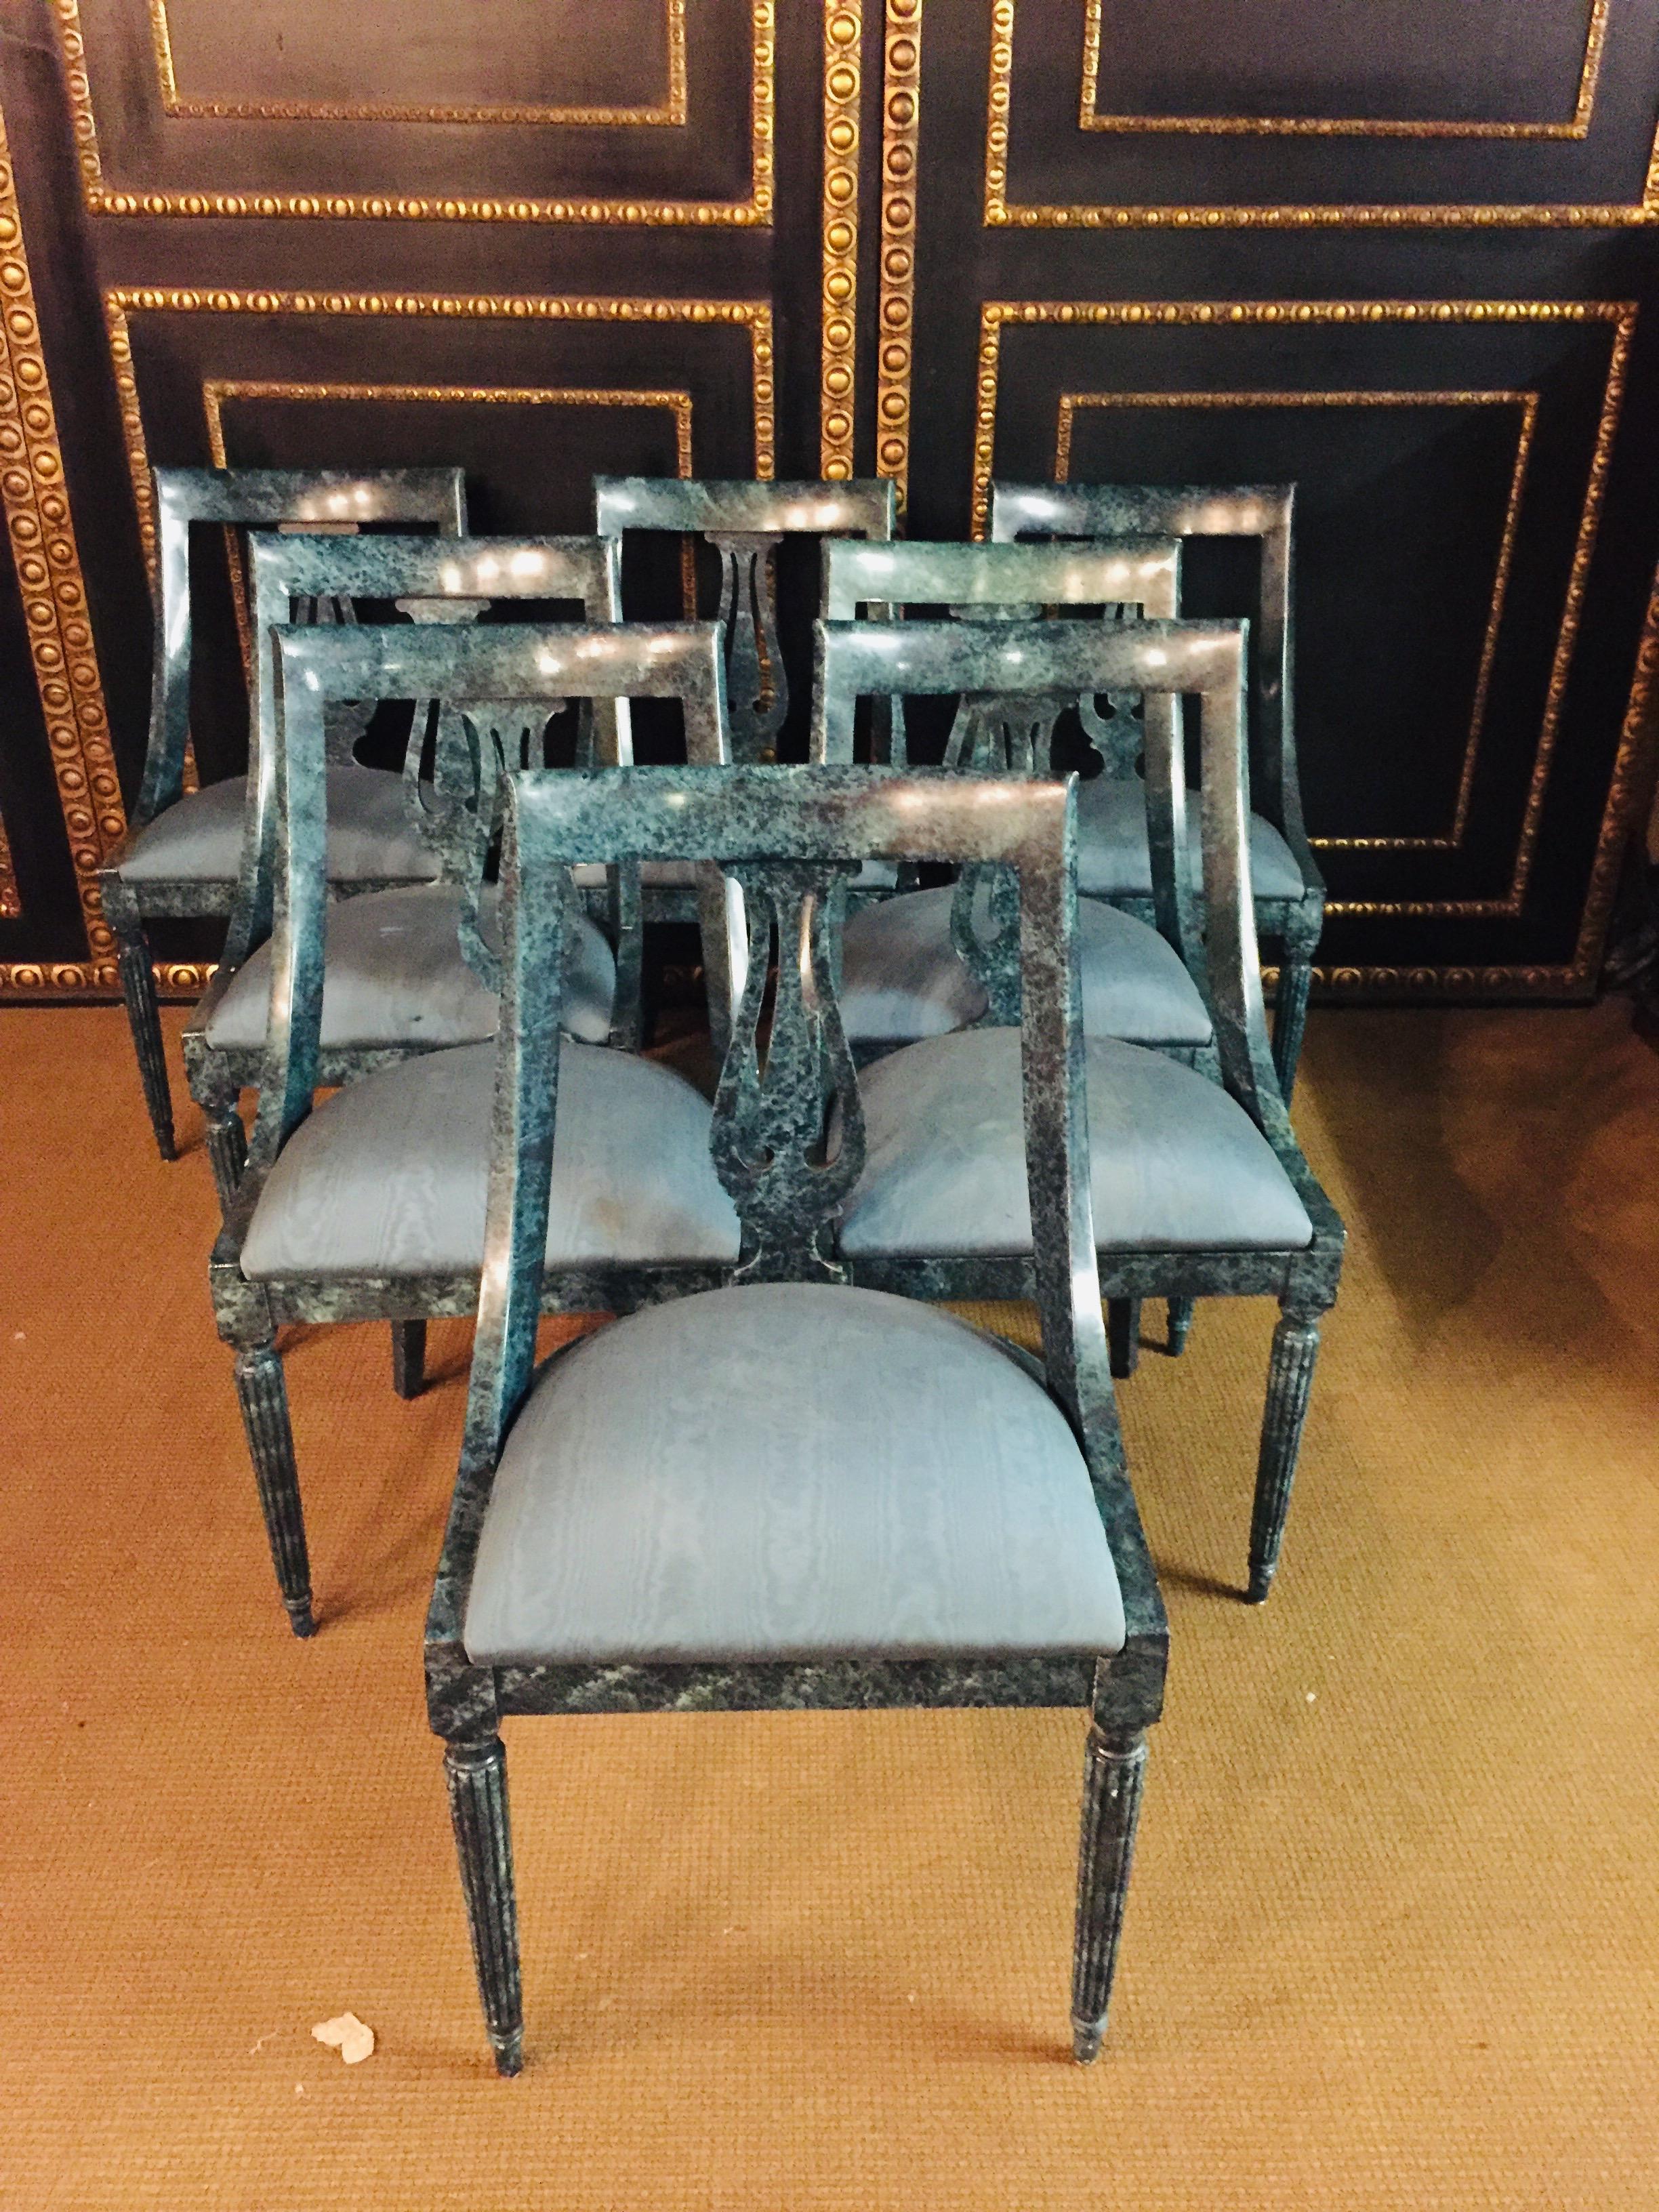 8 chairs in the modern Empire style turquoise marbled.